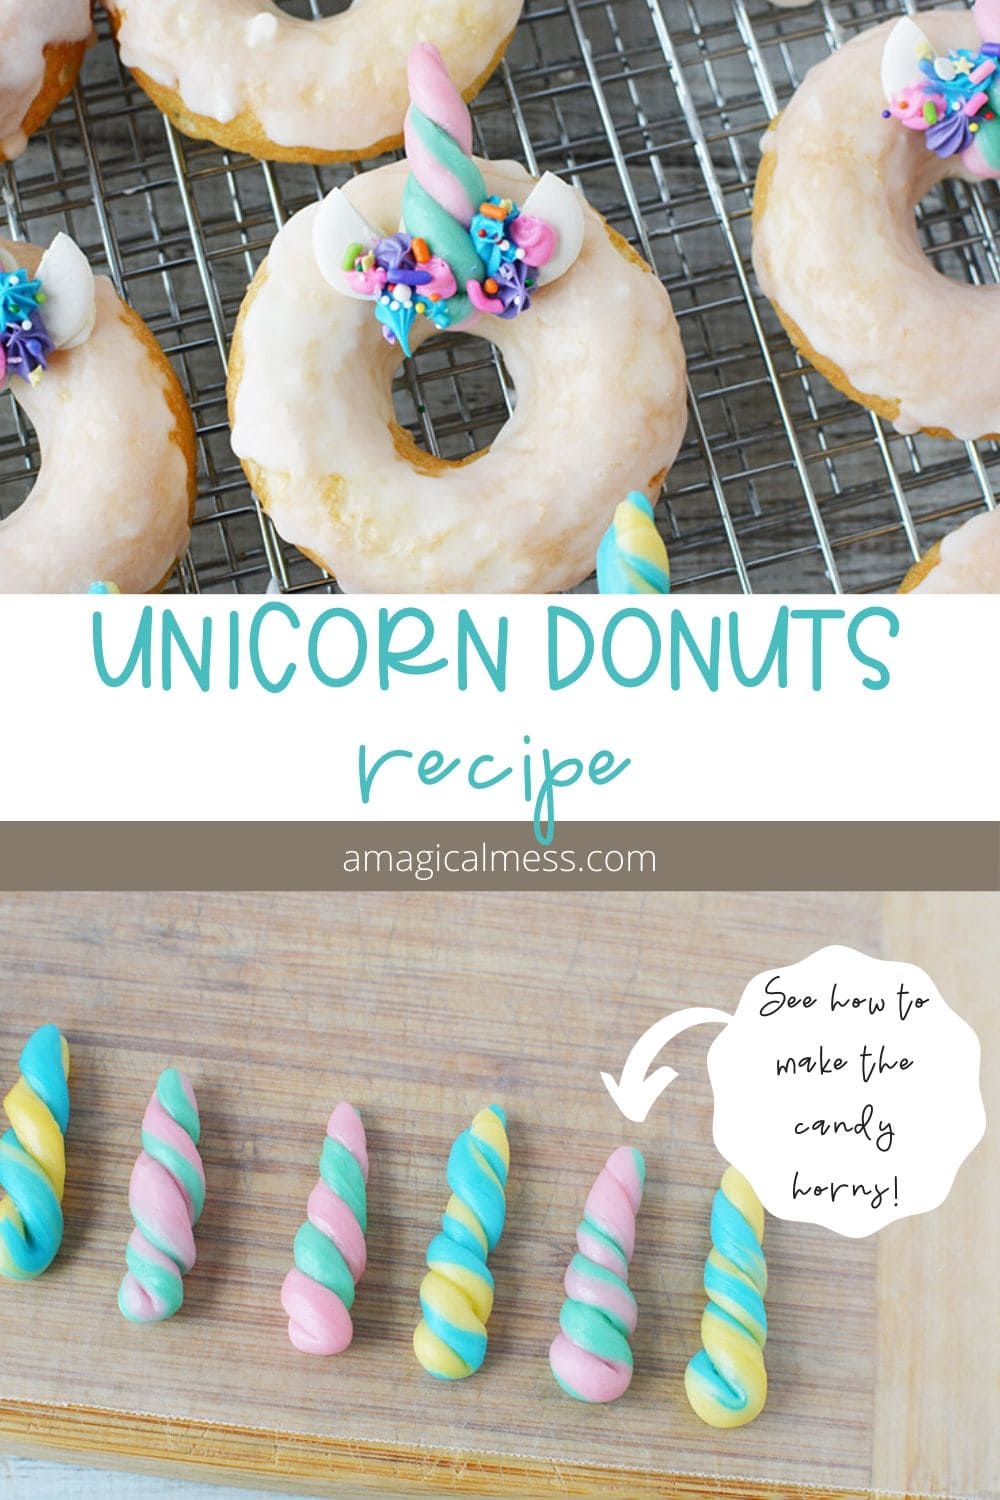 Donuts with unicorn horns